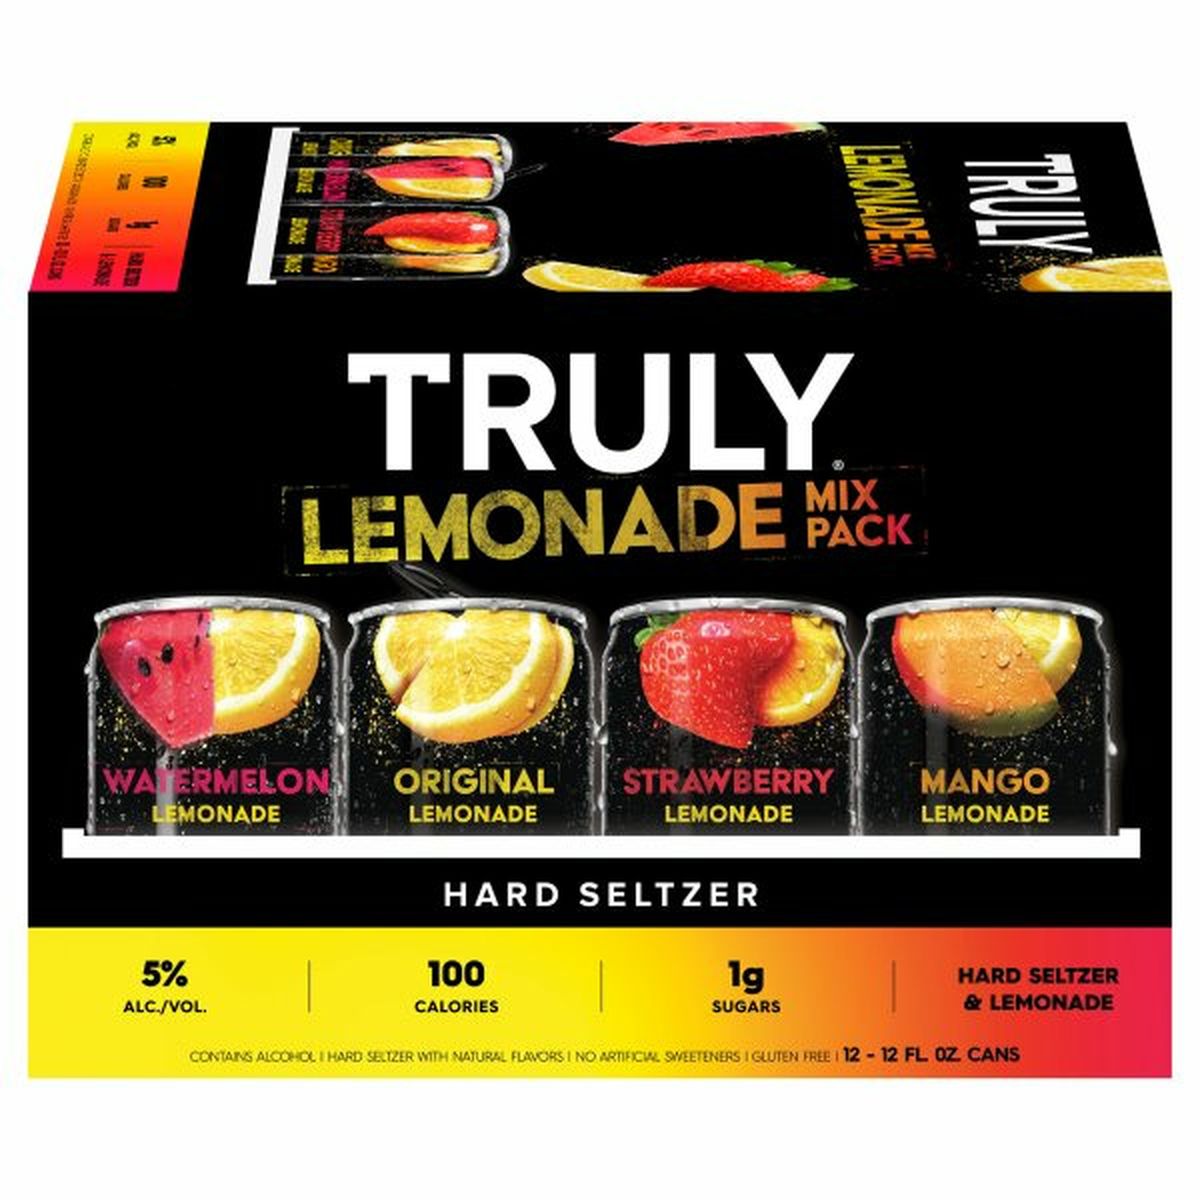 Calories in TRULY Hard Seltzer Lemonade & Seltzer Mix Pack  12/12 oz cans